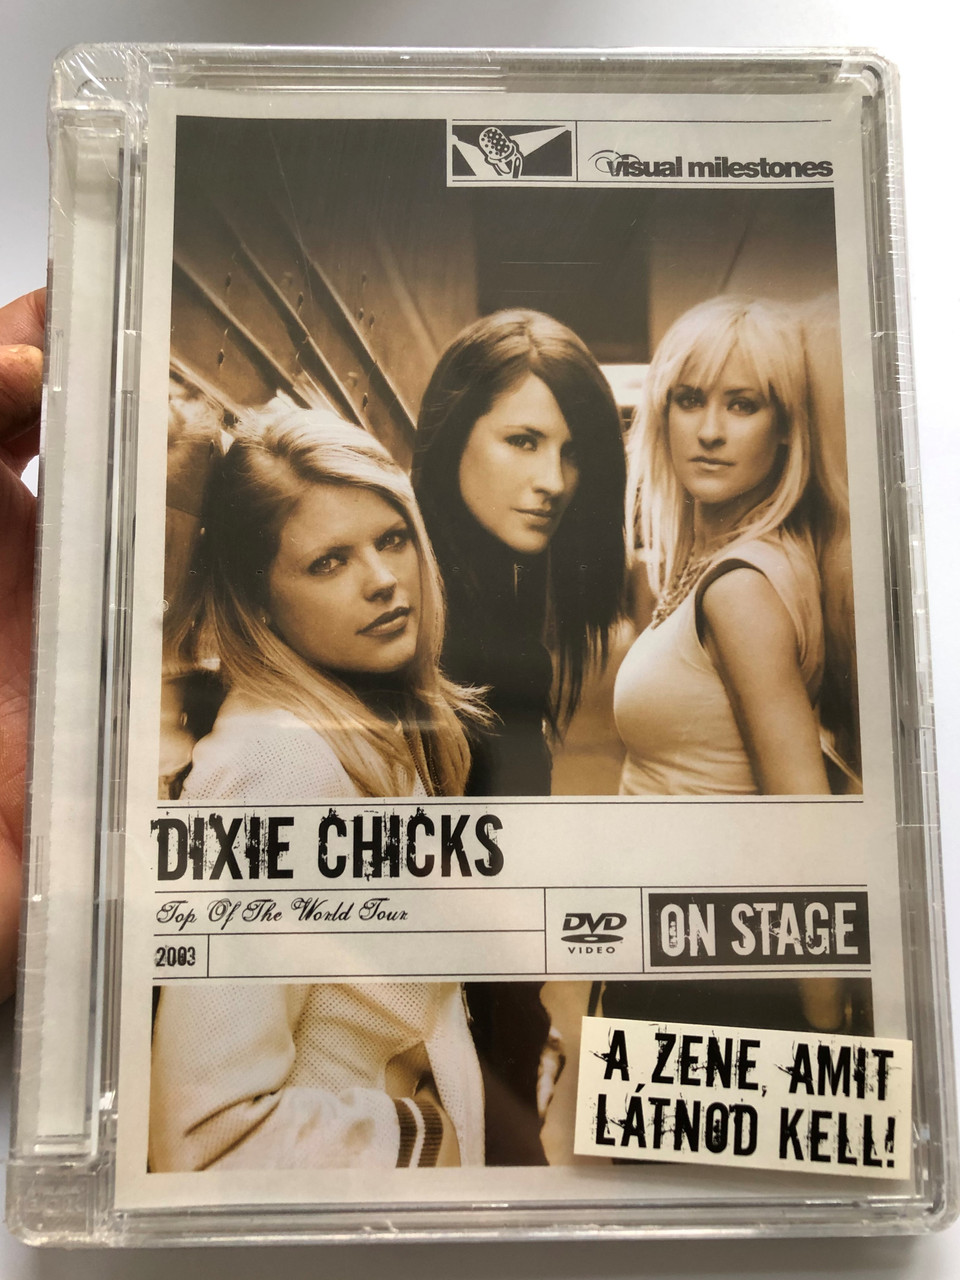 Dixie Chicks - Top of the World Tour DVD 2003 On Stage - A zene, amit  látnod kell /